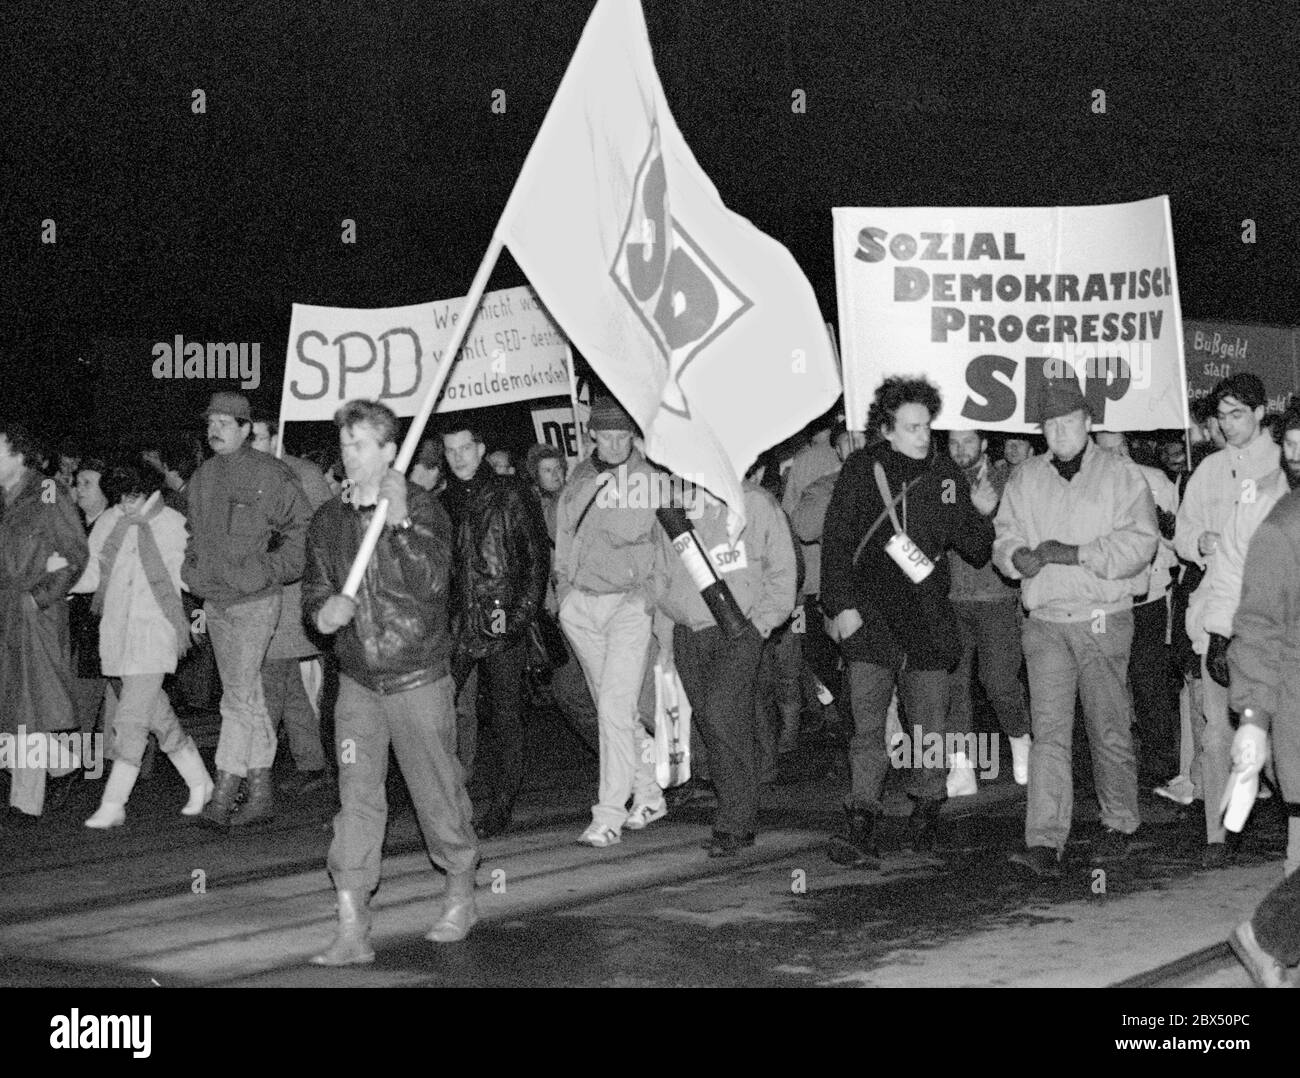 Saxony / GDR / early November 1989 Monday demonstration in Leipzig. The newly founded SPD-Ost (SDP) marches for the first time around the old town, the wall still stands, the GDR still exists. The Volkspolizei tries to break up the demonstrations.  // SPD / History / Opposition / Wende / Politics sdp-spd *** Local Caption *** East Germany / Communism At the end of 1989 big demonstrations took place in Leipzig, which were not allowed, every Monday, therefor called monday demonstrations. They grew up to 100 000 participants. Those manifestations were an important factor for the fall of the Stock Photo